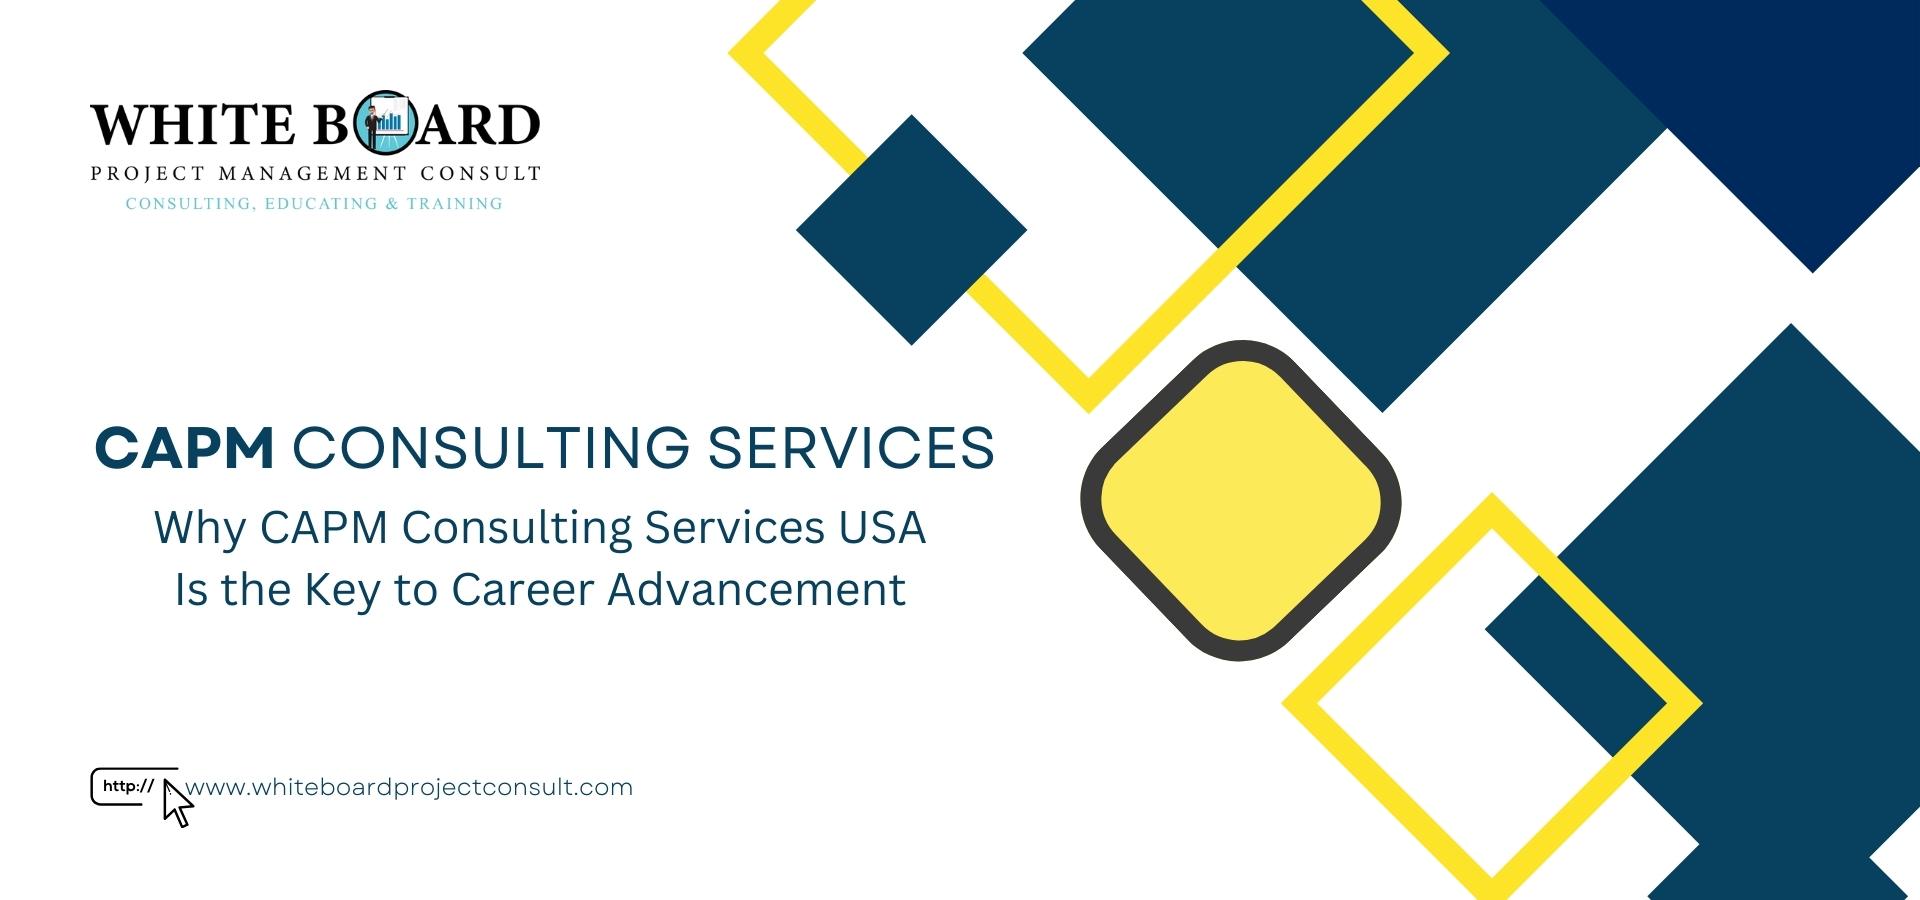 Why CAPM Consulting Services USA Is the Key to Career Advancement